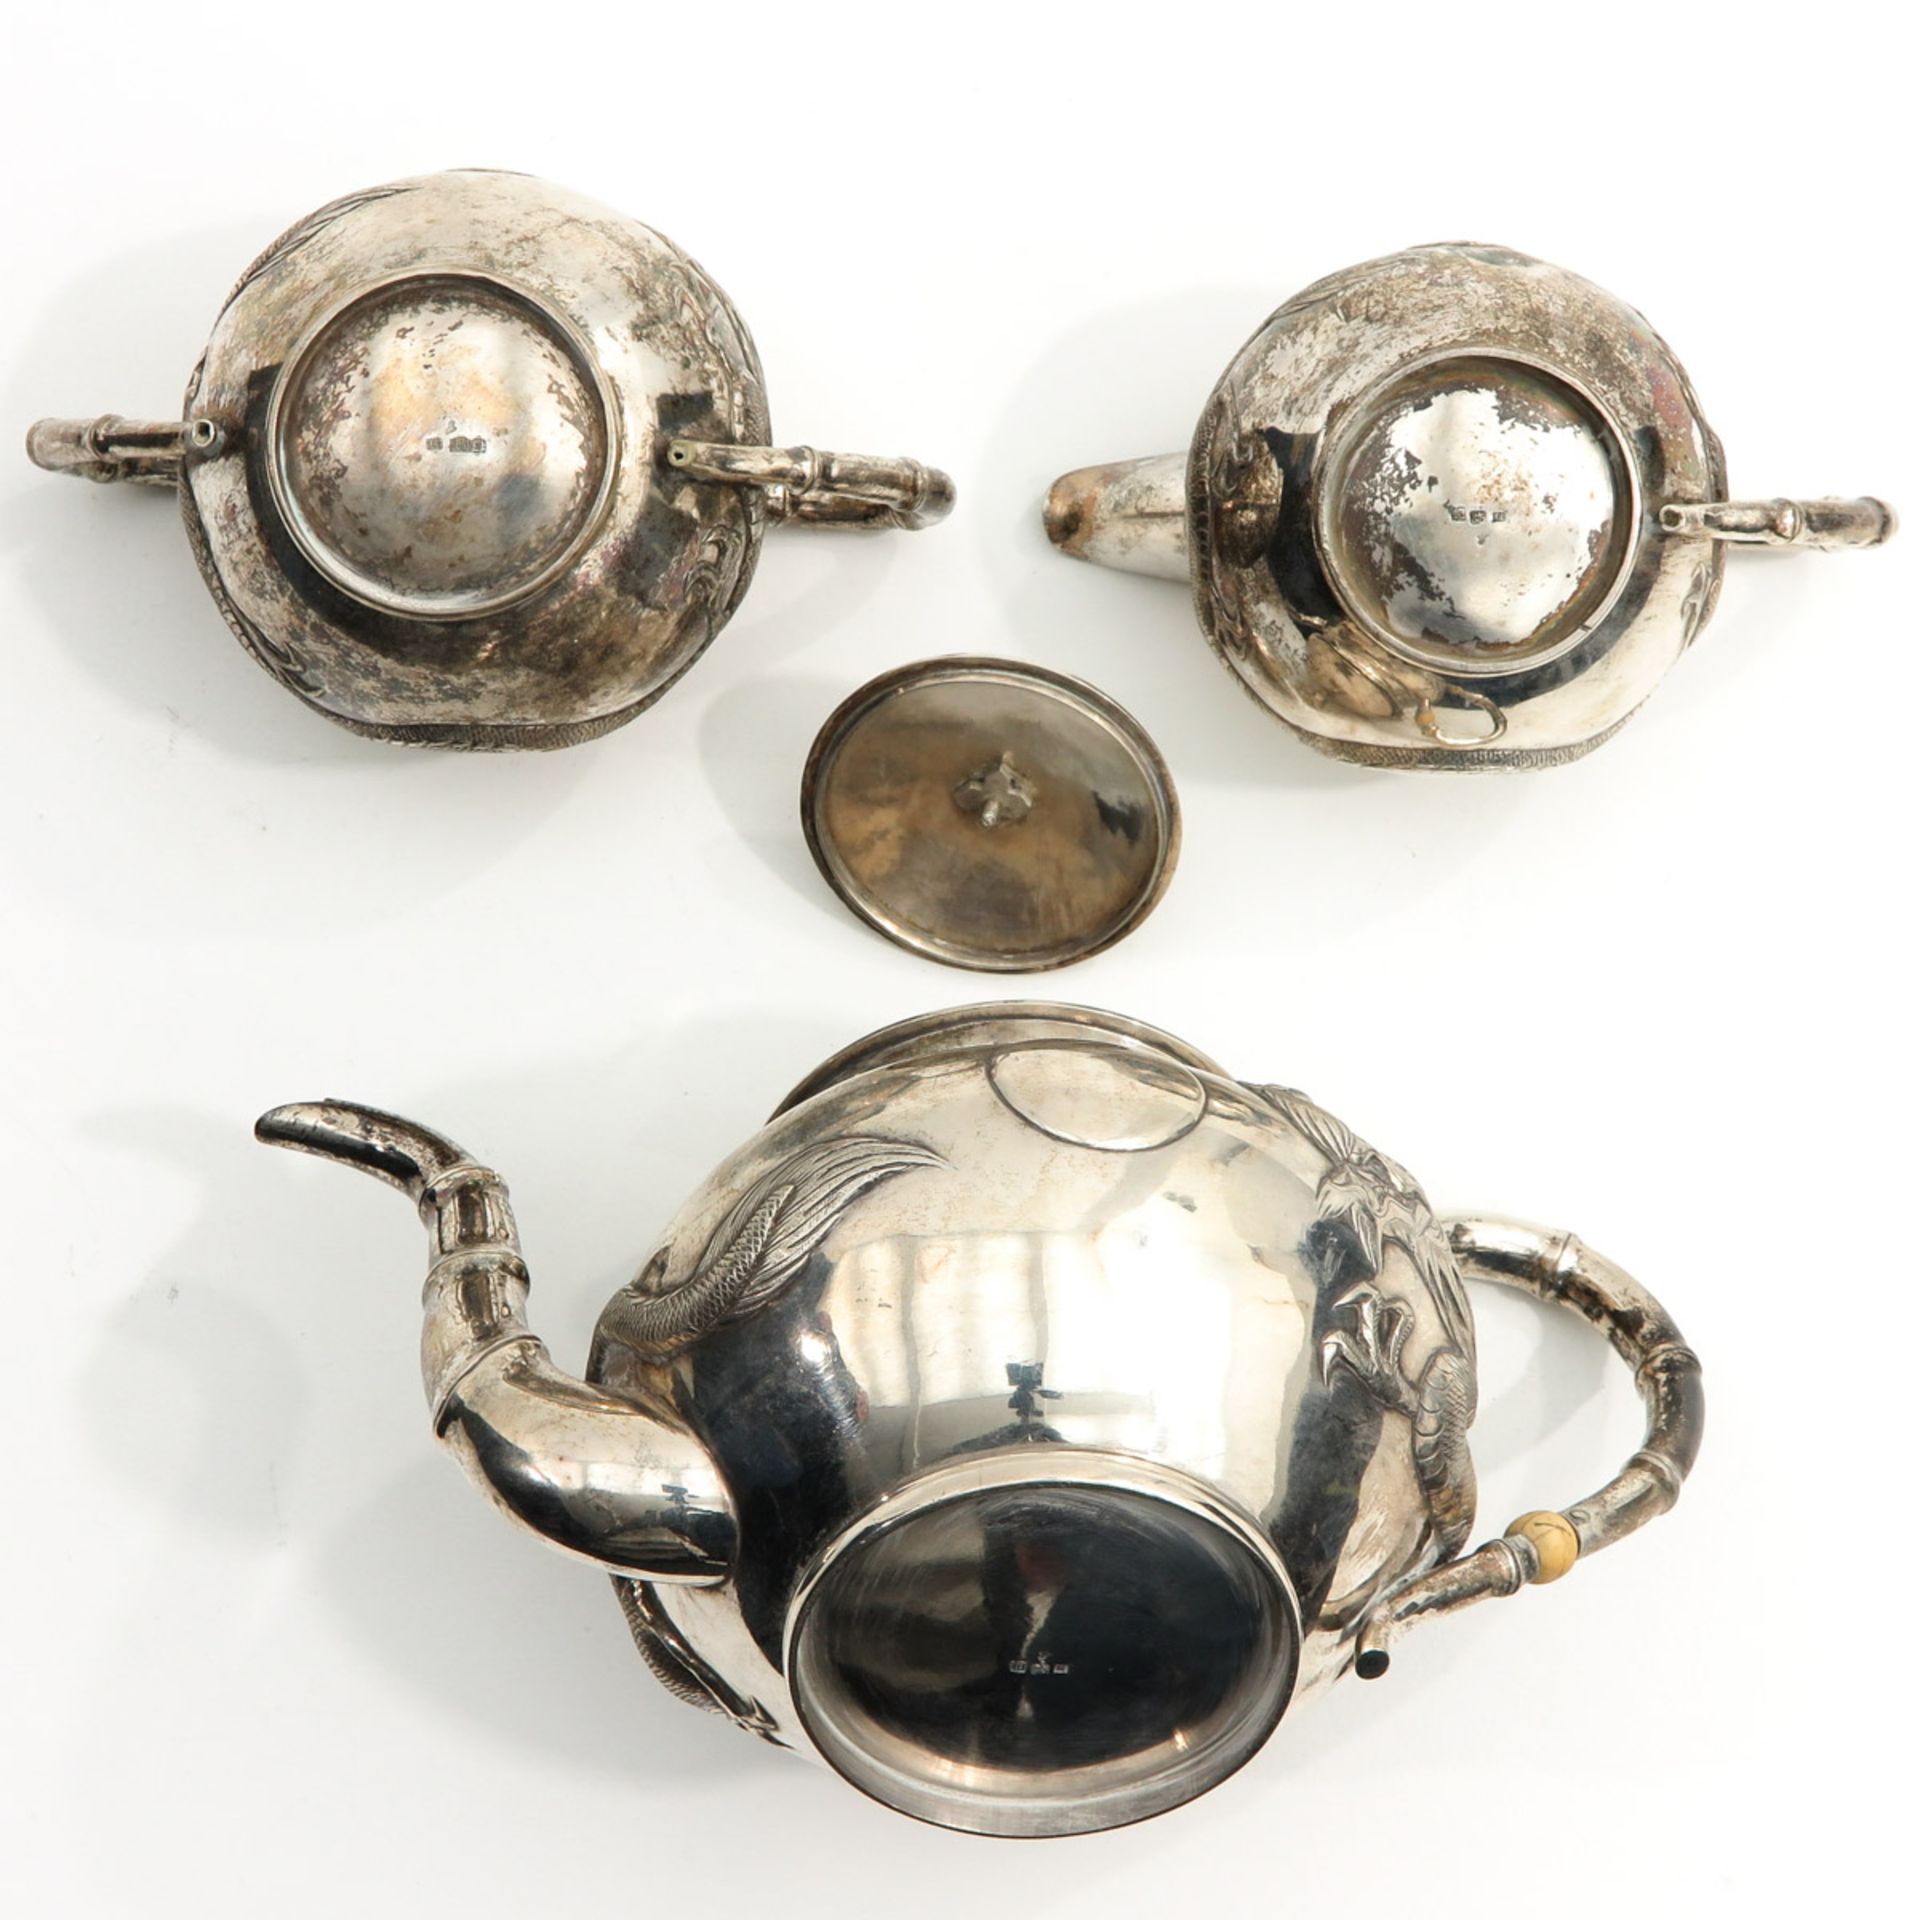 A 3 Piece Chinese Silver Tea Service - Image 6 of 10